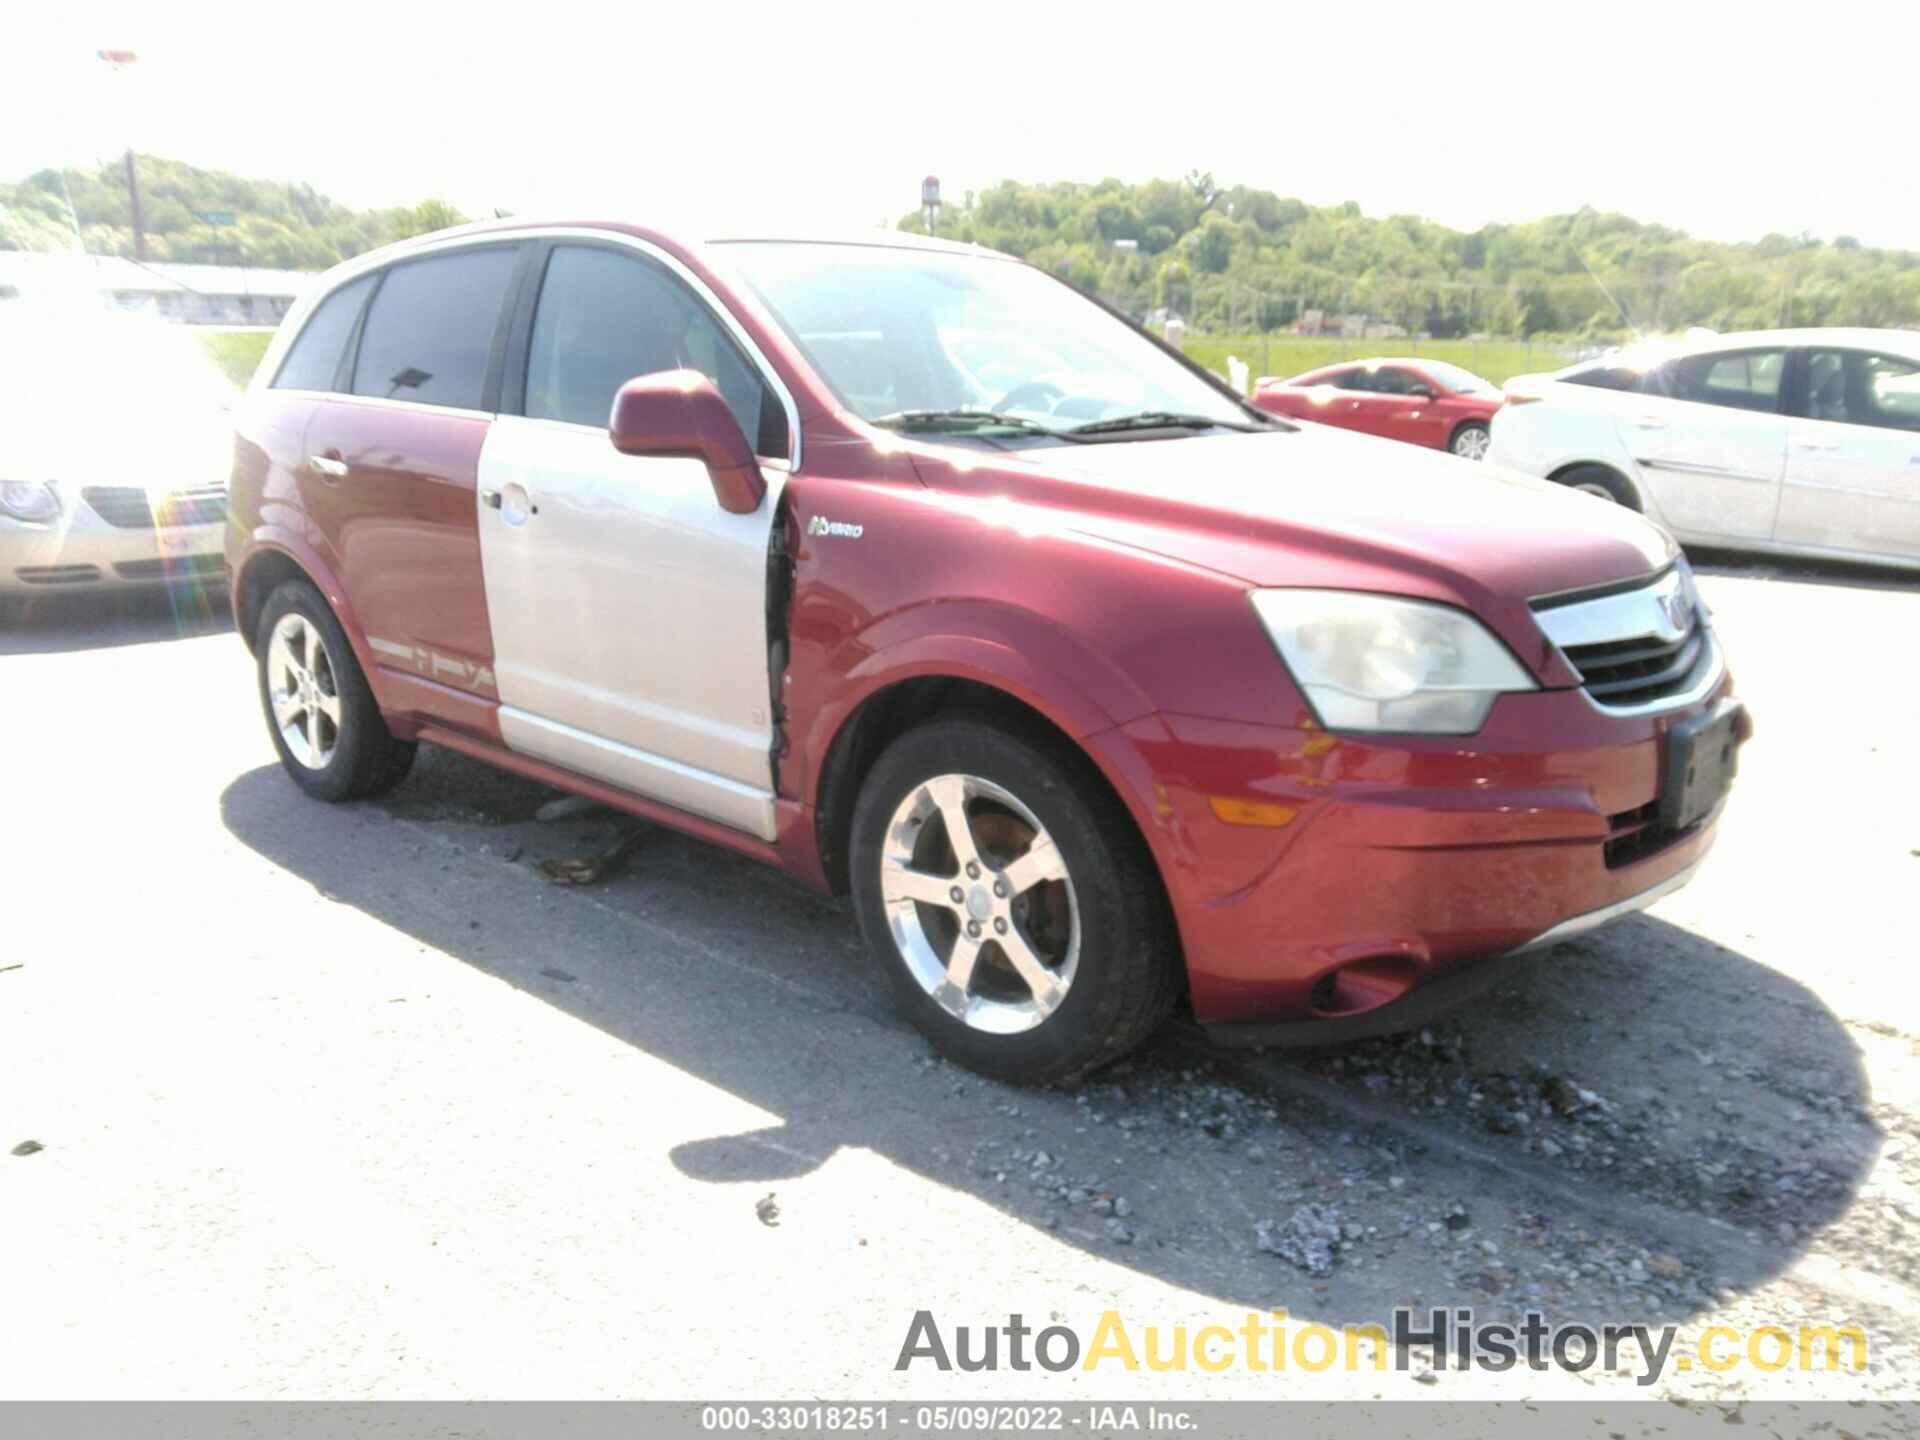 SATURN VUE HYBRID I4, 3GSCL93ZX9S611067